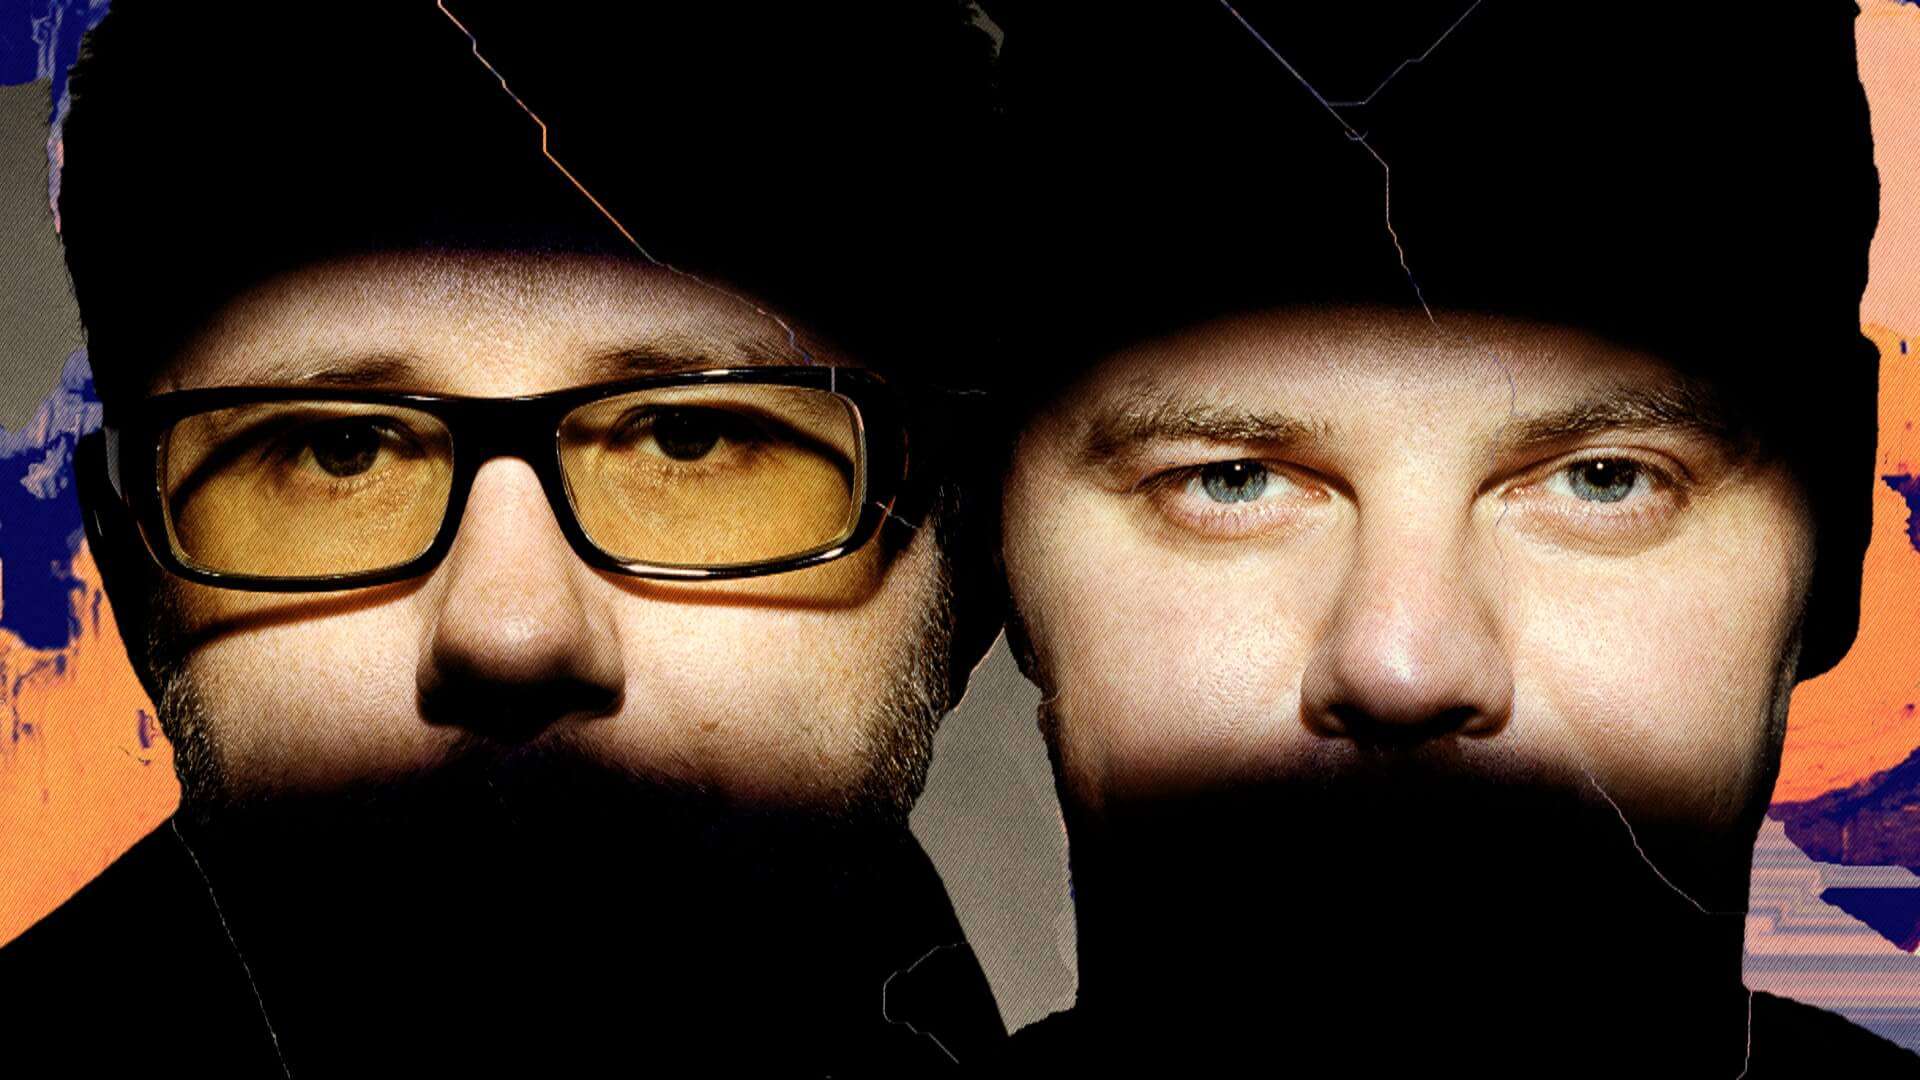 The Chemical Brothers prepare to release new single ‘No Reason’ tomorrow